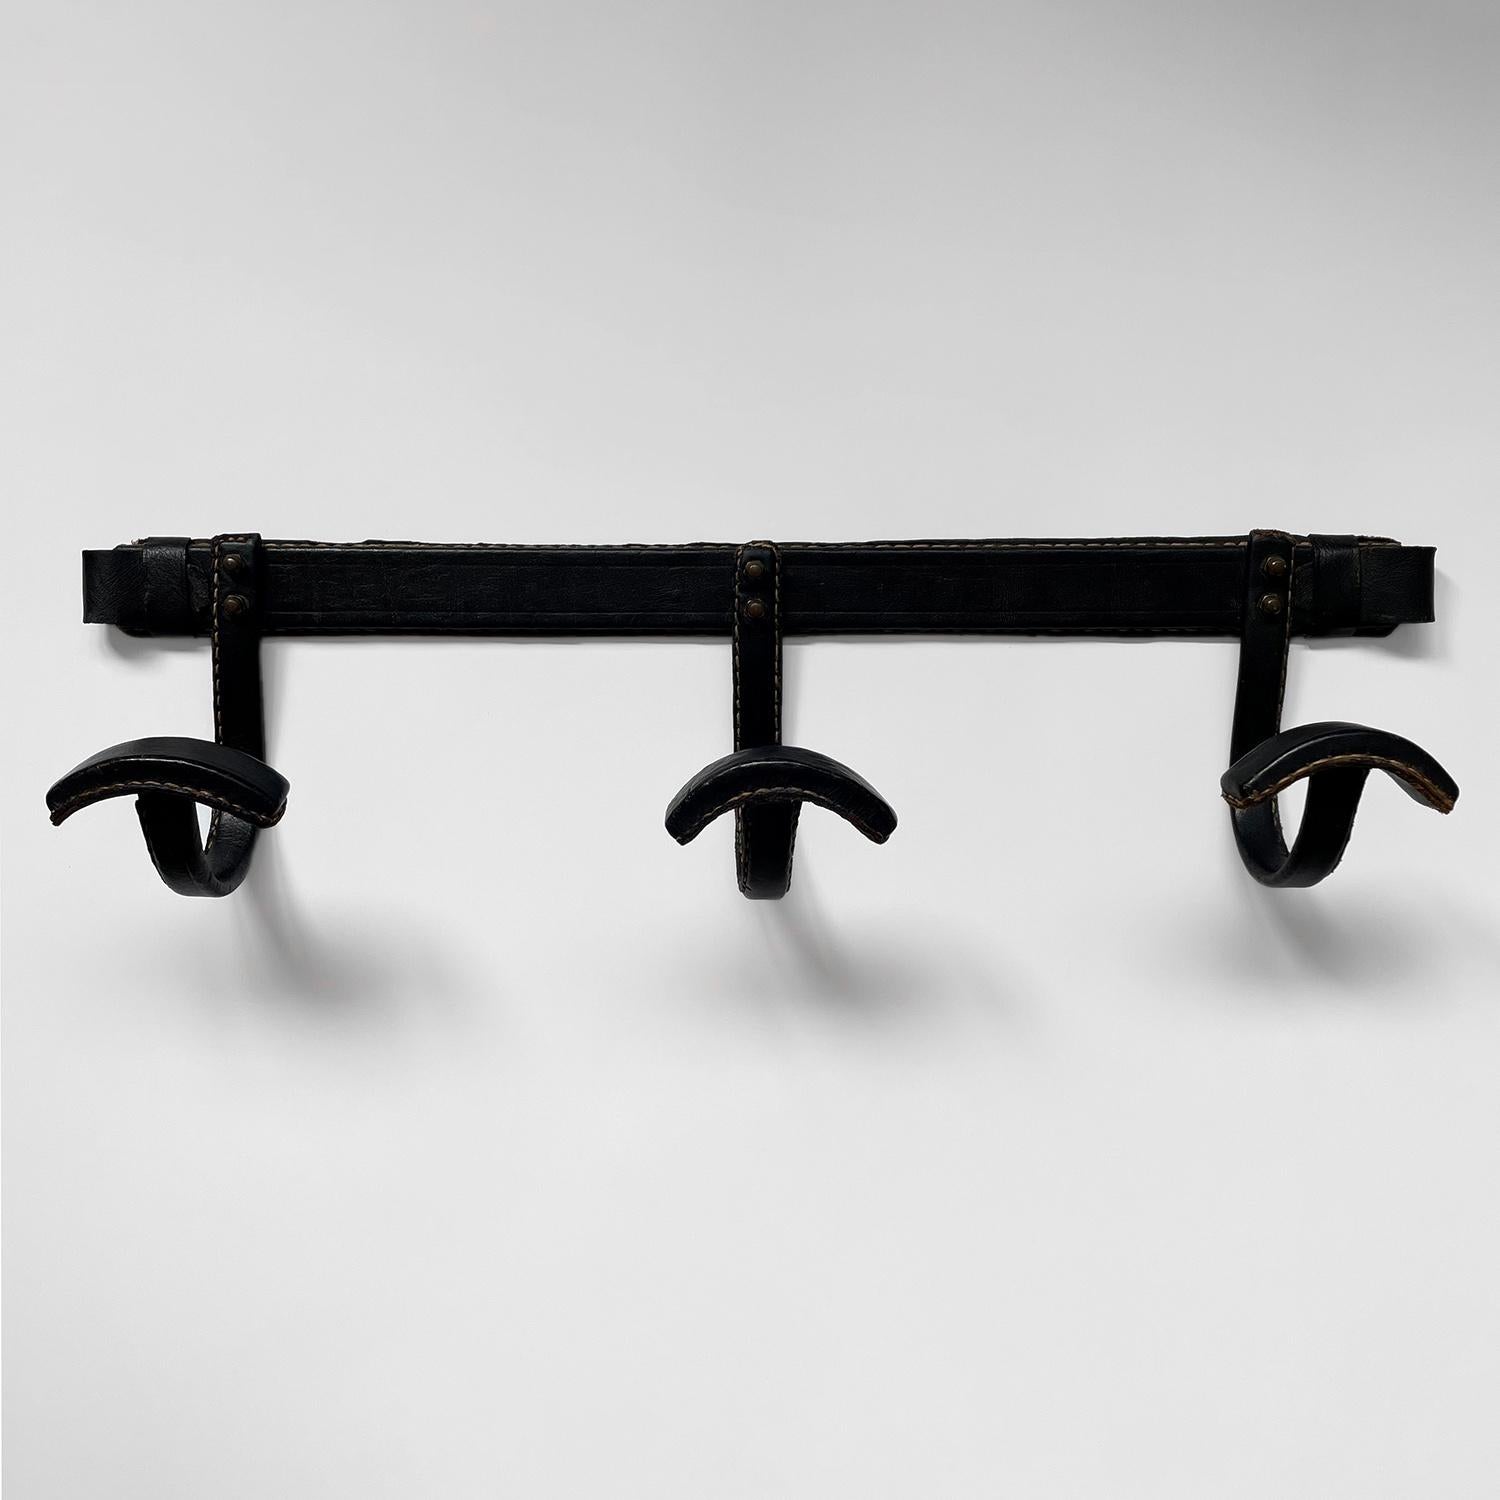 Jacques Adnet coat rack 
France, circa 1940’s
Black leather wrapped coat rack with signature contrast stitching
Three individual hooks each accented with double stud rivet detail
Beautifully worn in leather with minor loss and patina from age and